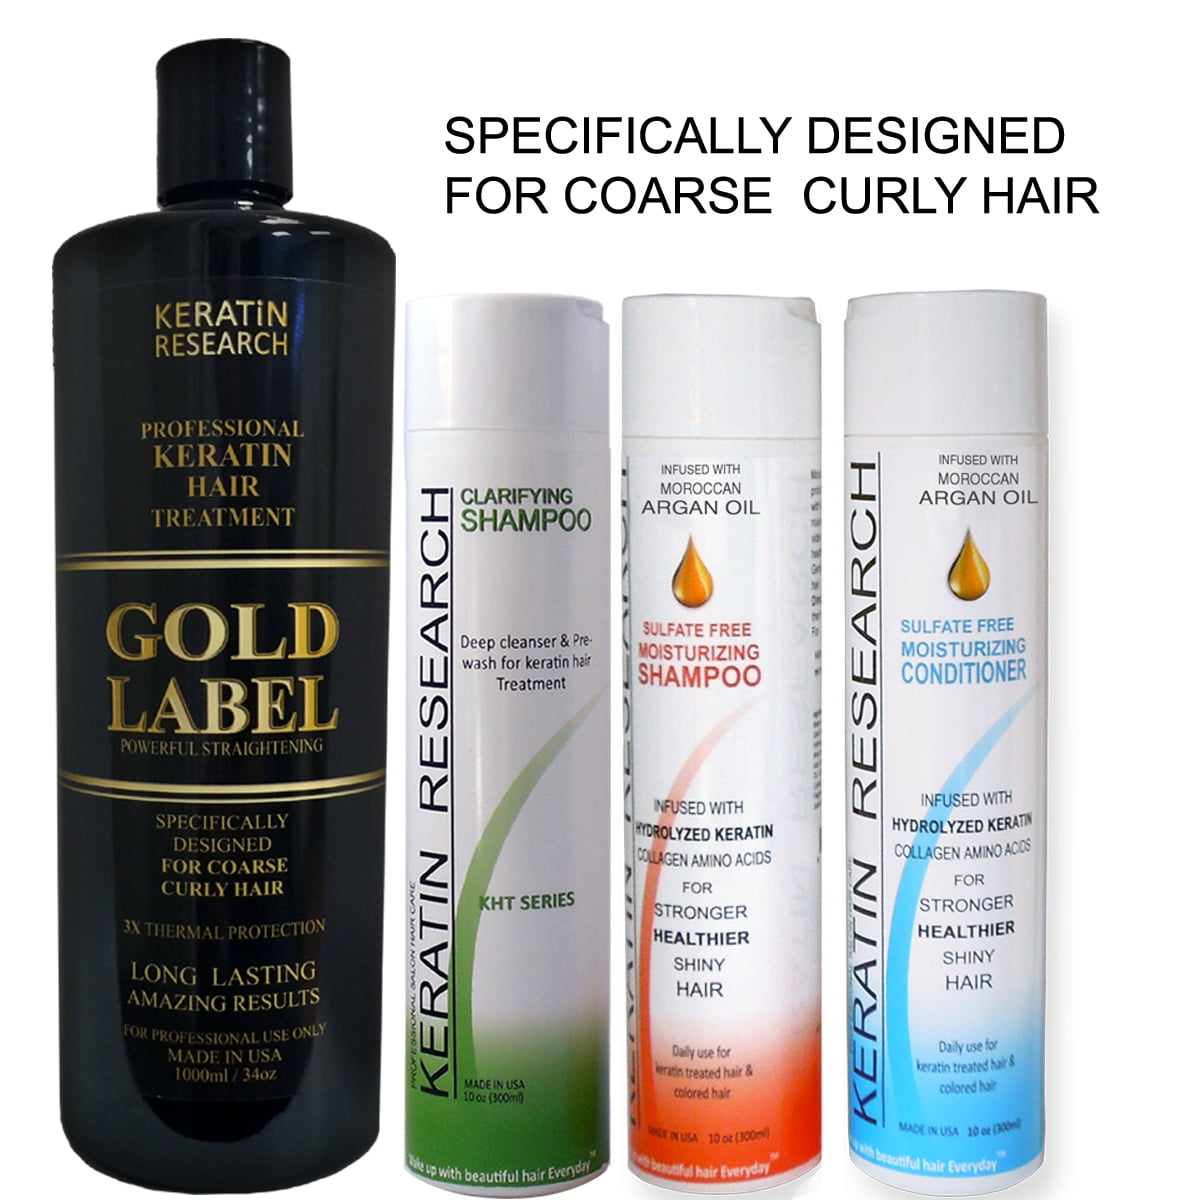 Keratin Research Gold Label X-LARGE SET Professional Keratin Hair Treatment  Super Enhanced Formula Specifically Designed for Coarse Curly Black,  African, Dominican and Brazilian Hair Types 